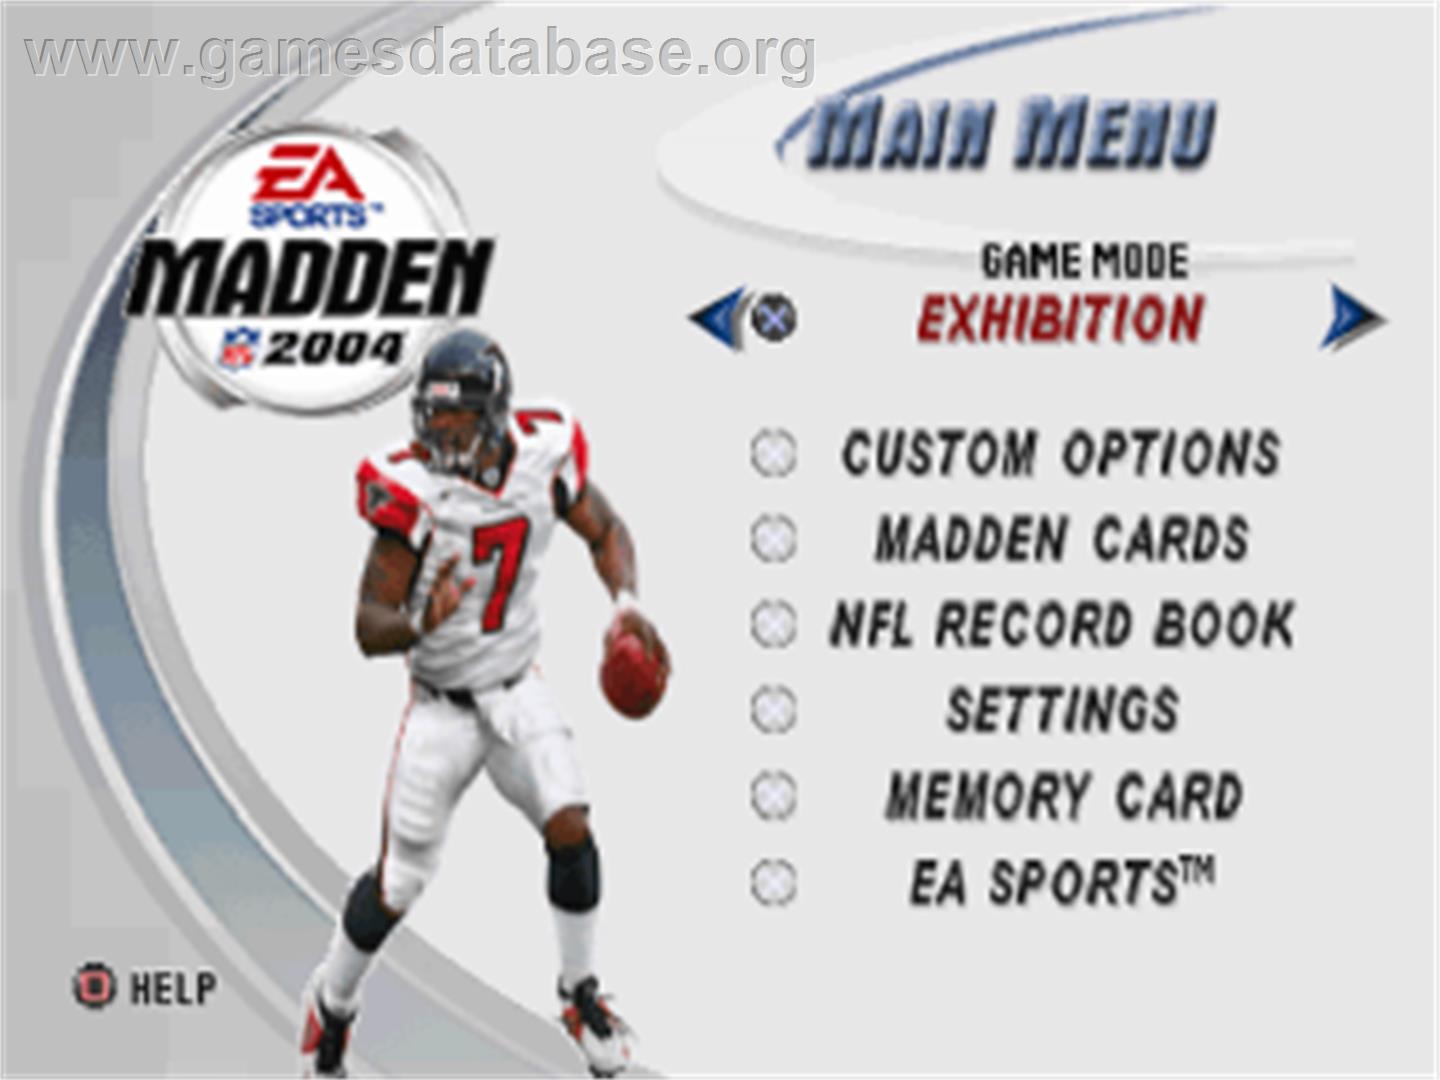 Madden NFL 2004 - Sony Playstation - Artwork - Title Screen